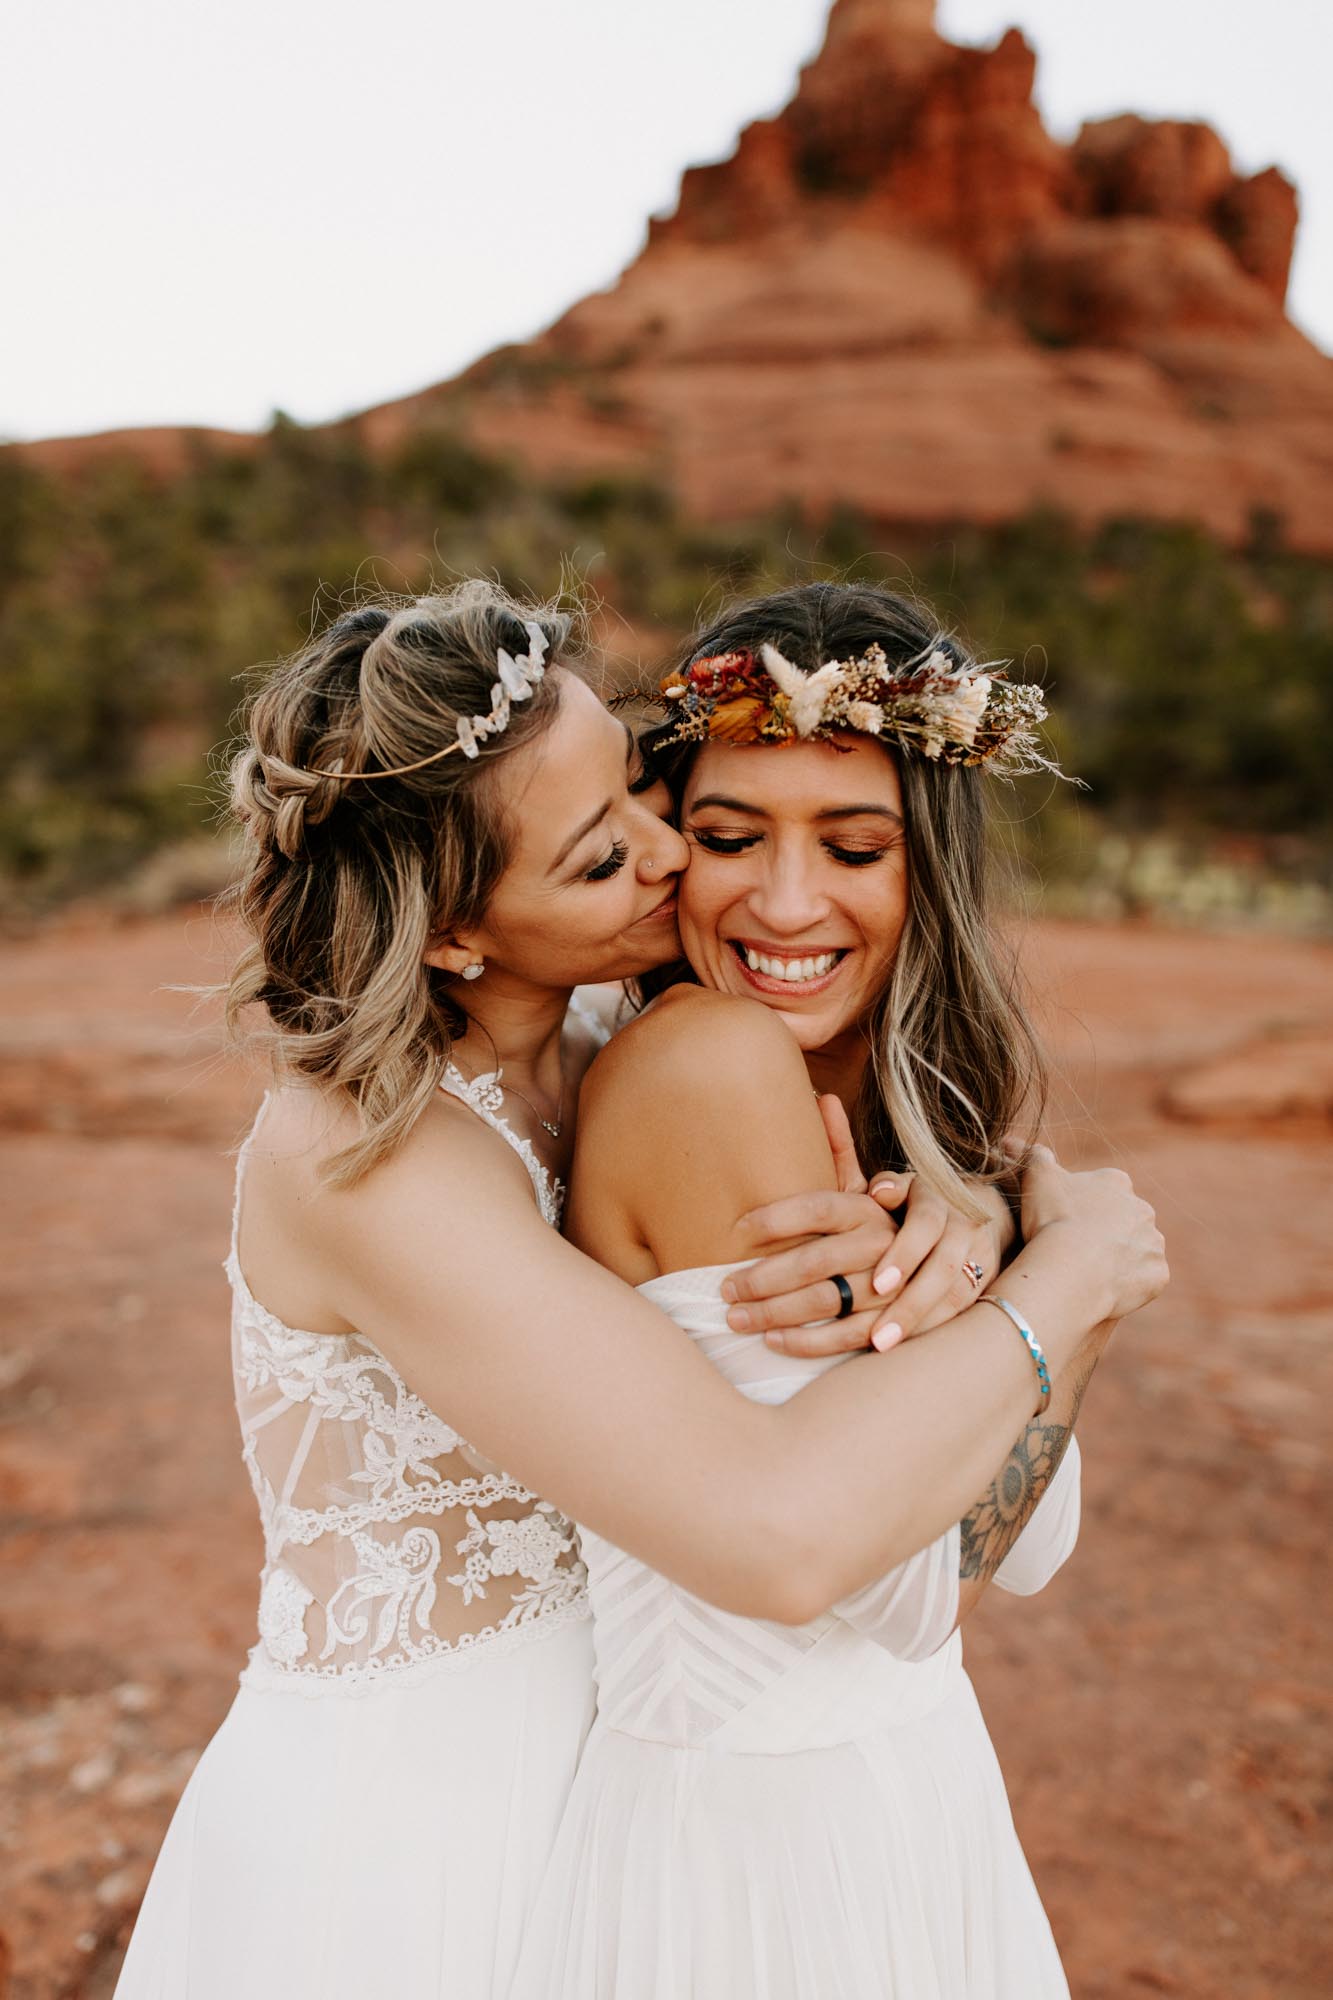 Breathtaking Sedona elopement surrounded by close family and friends | Jessica and Nick Photo + Film | Featured on Equally Wed, the leading LGBTQ+ wedding magazine